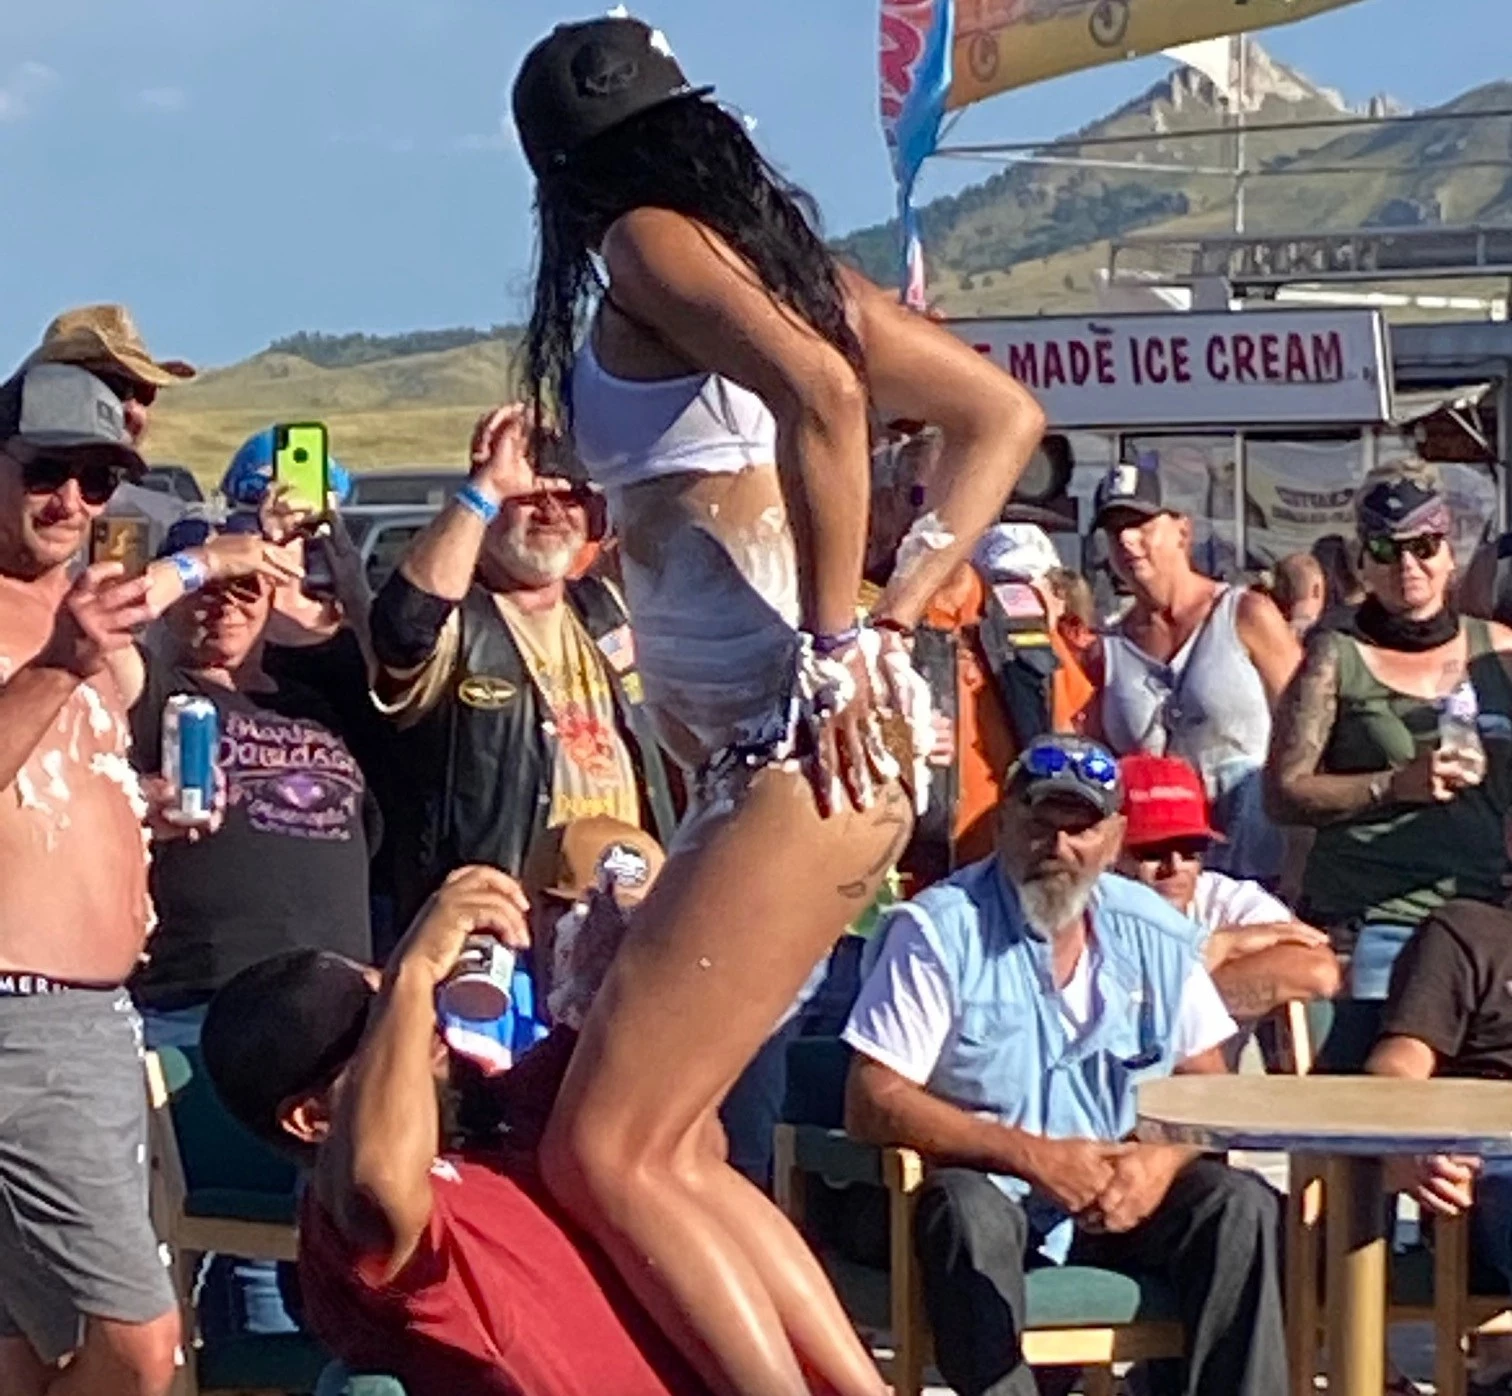 Bikinis, Boobs, and Booty! Pics From the Sturgis Motorcycle Rally